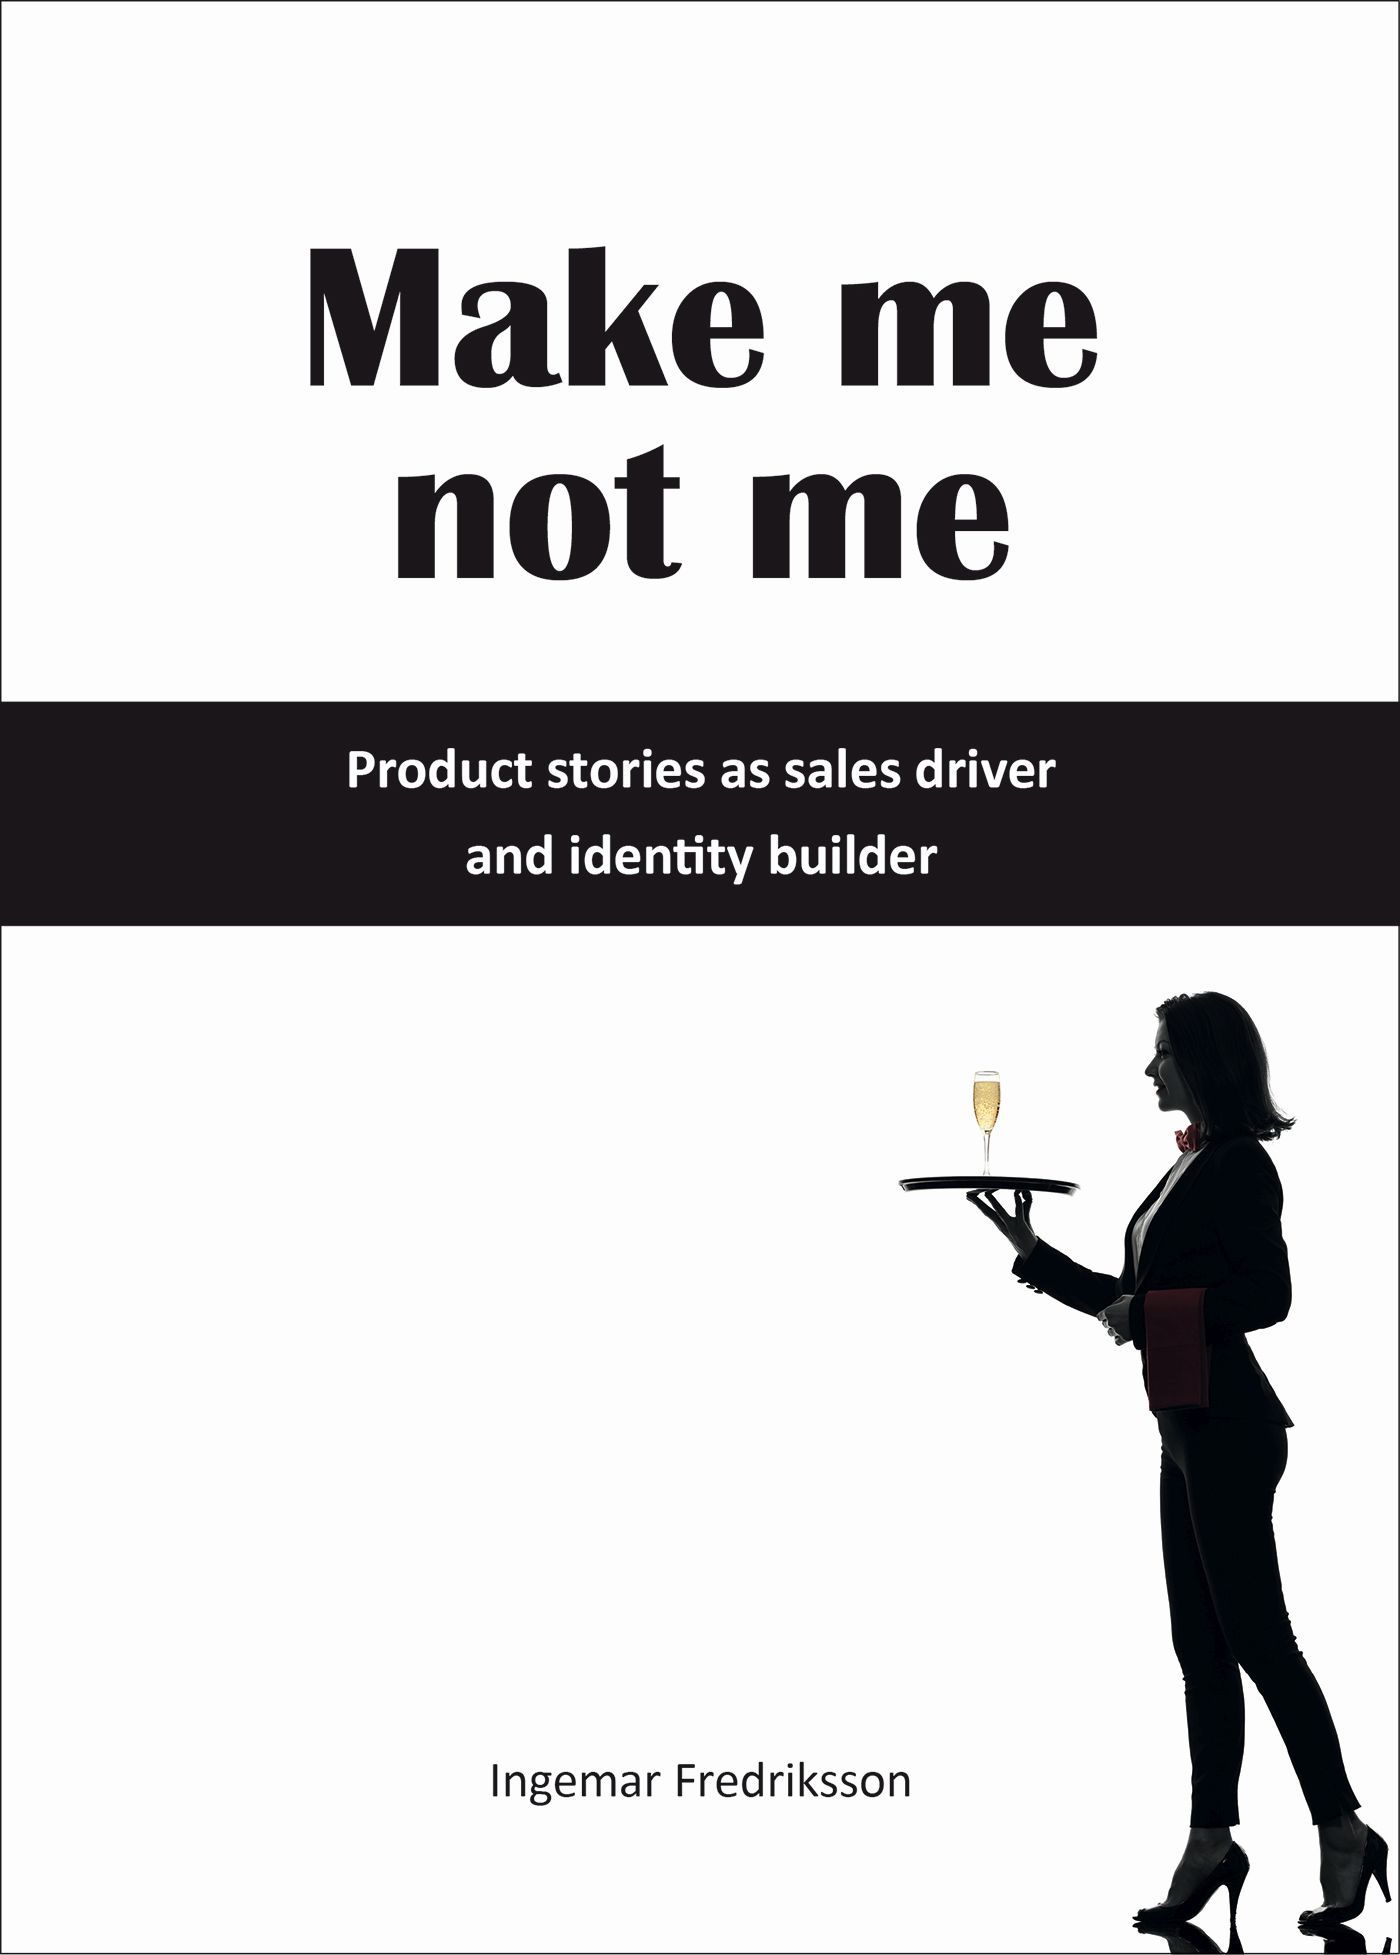 Make me not me - Product stories as sales driver and identity builder, eBook by Ingemar Fredriksson